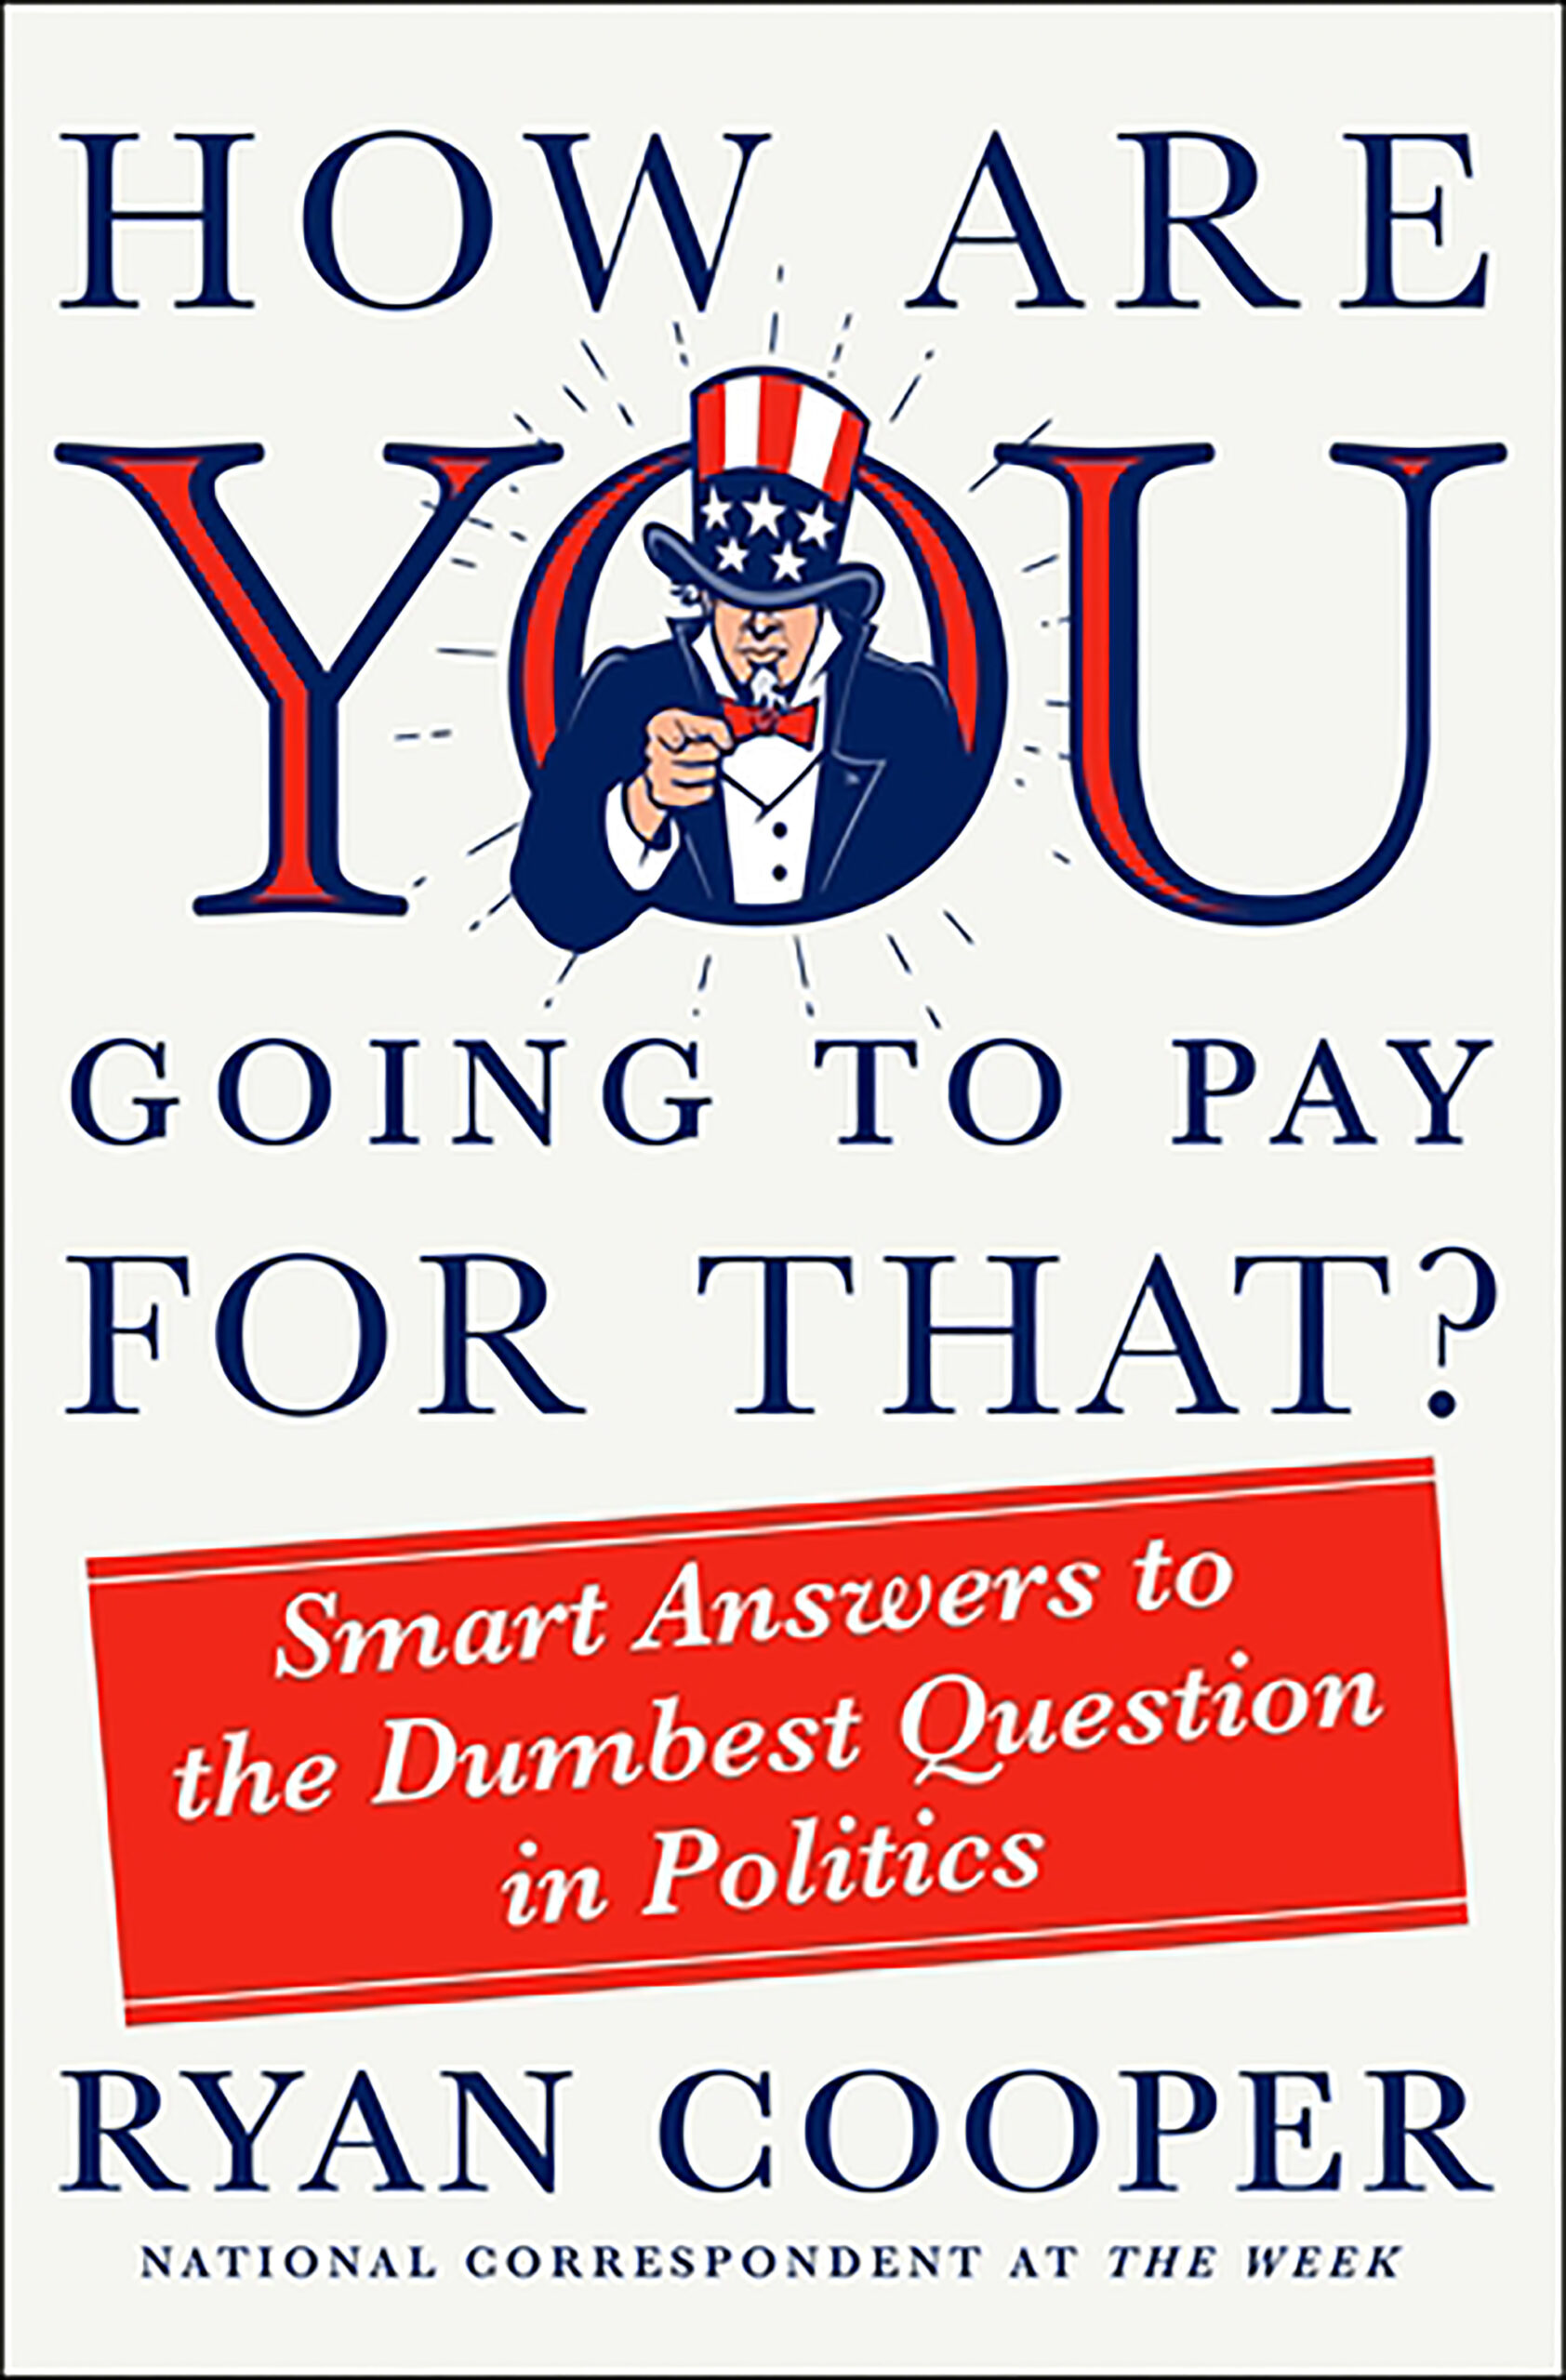 *VIRTUAL* Book Launch: How Are You Going to Pay For That? by Ryan Cooper in conversation with David Dayen